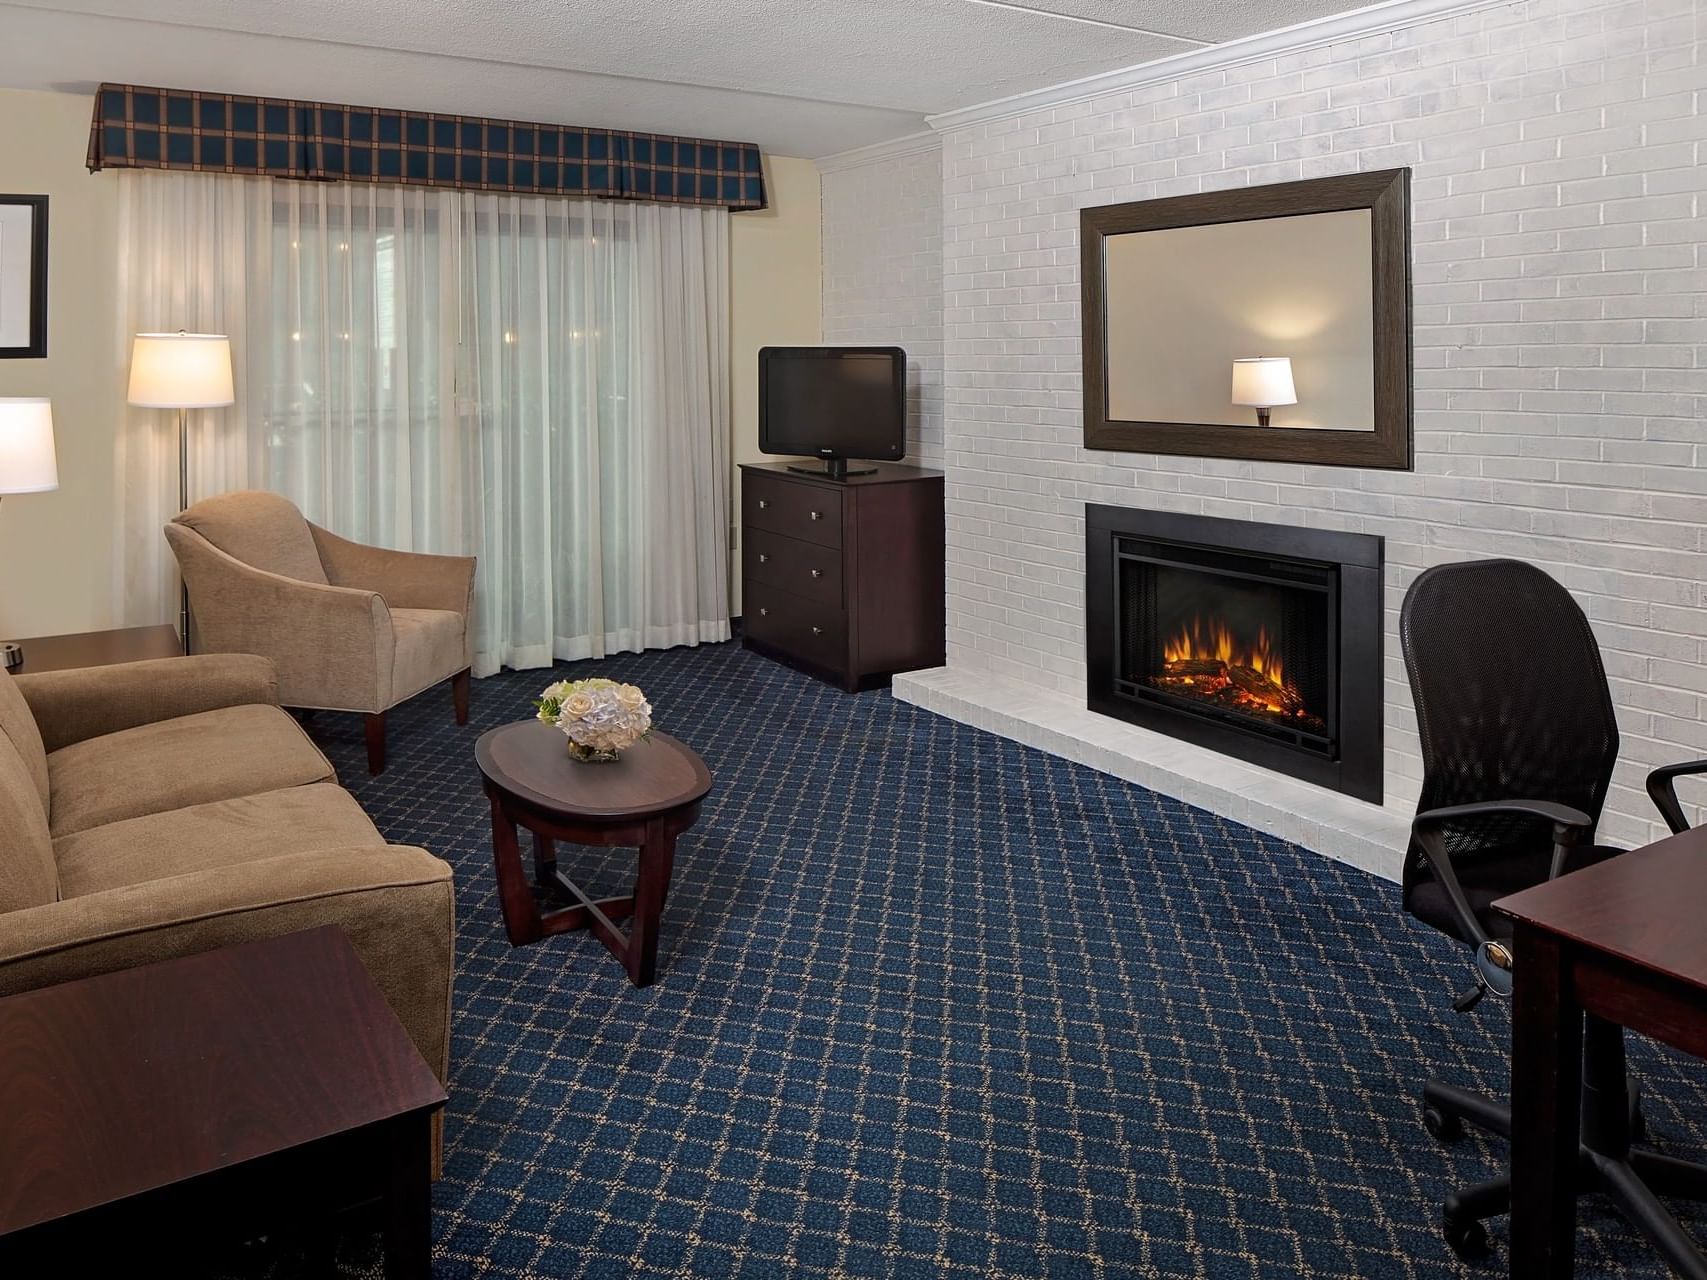 Couch & fireplace in 2 Room Double Bed Suite at Boxboro Regency